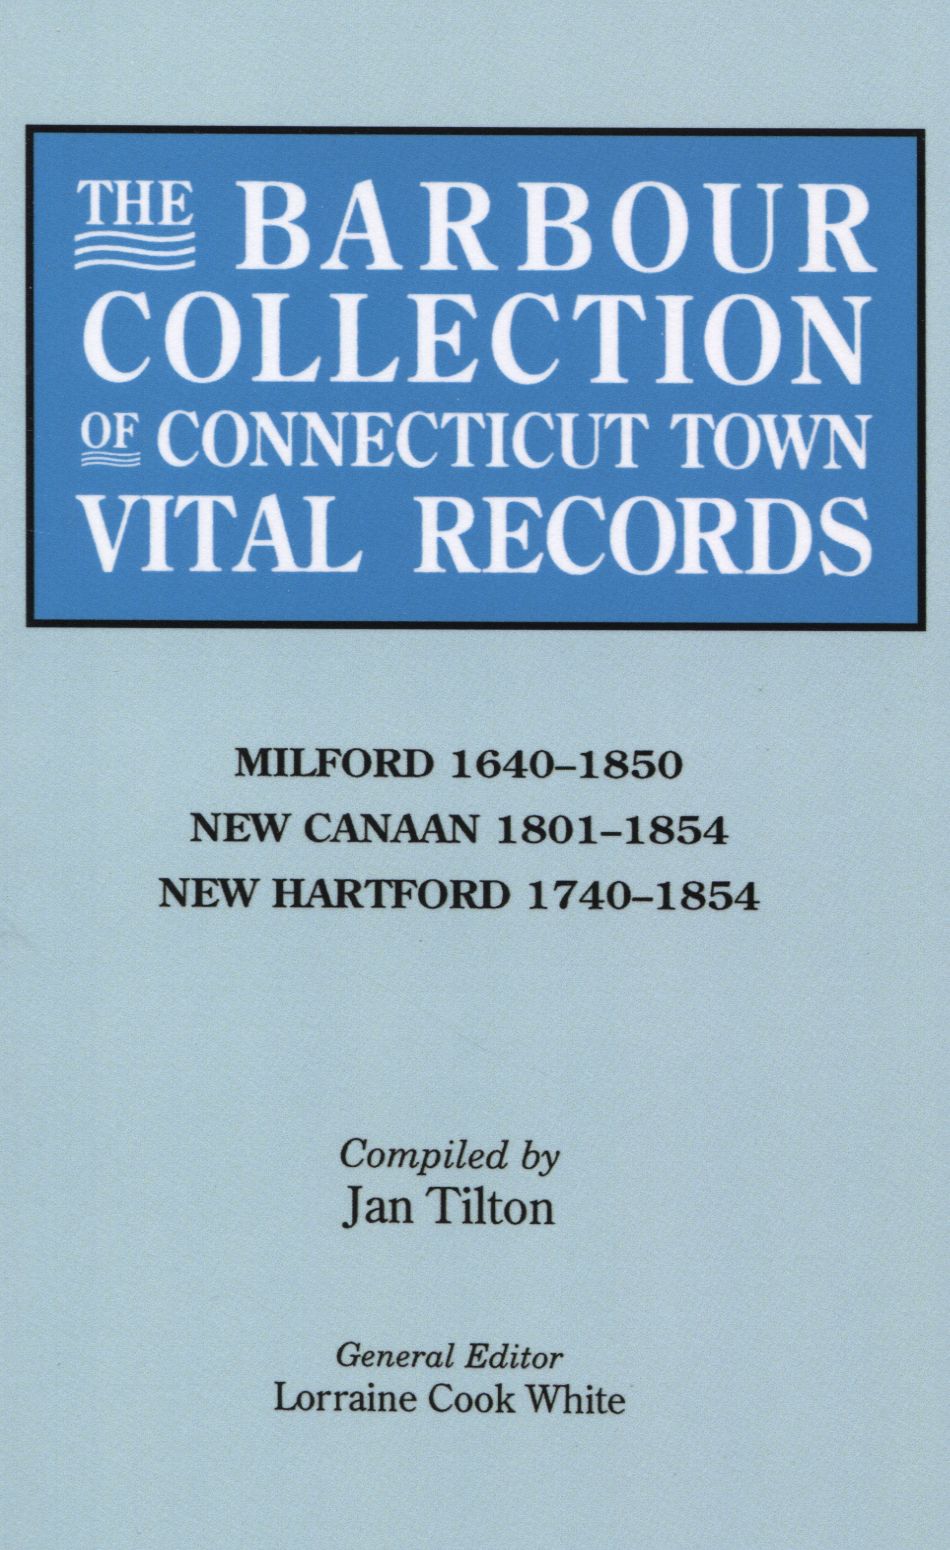 The Barbour Collection of Connecticut Town Vital Records [Vol. 28]